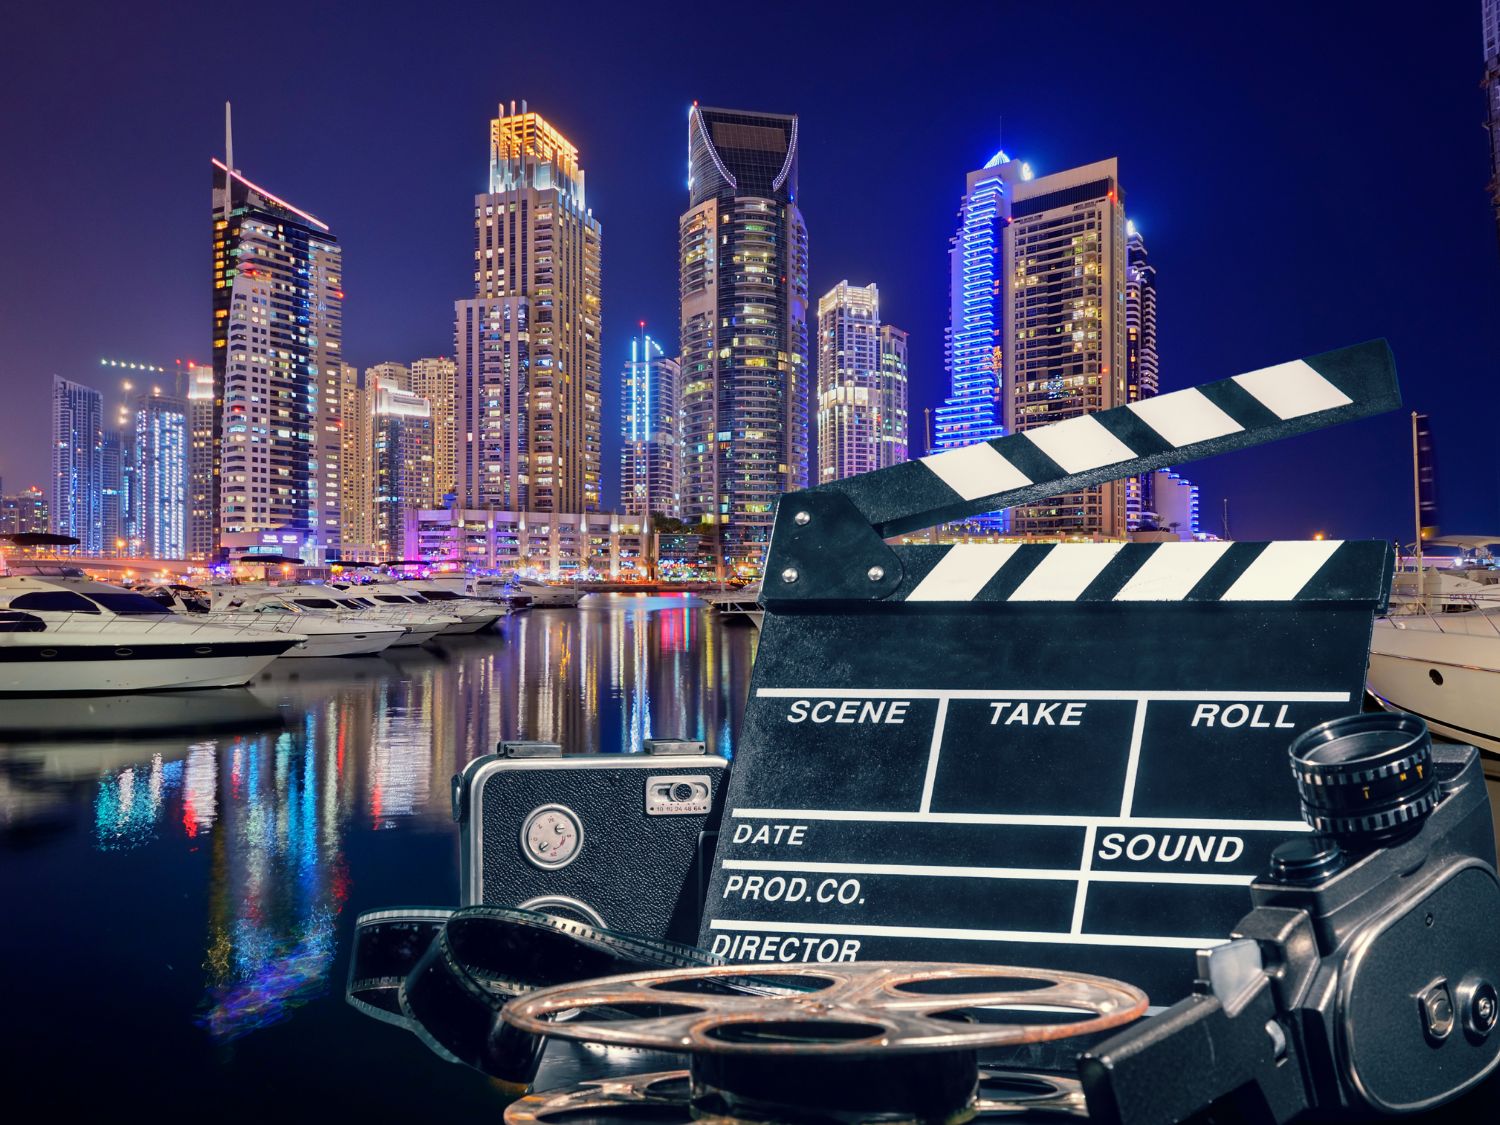 10 Extraordinary Movies Set In Dubai That Will Inspire You To Visit!